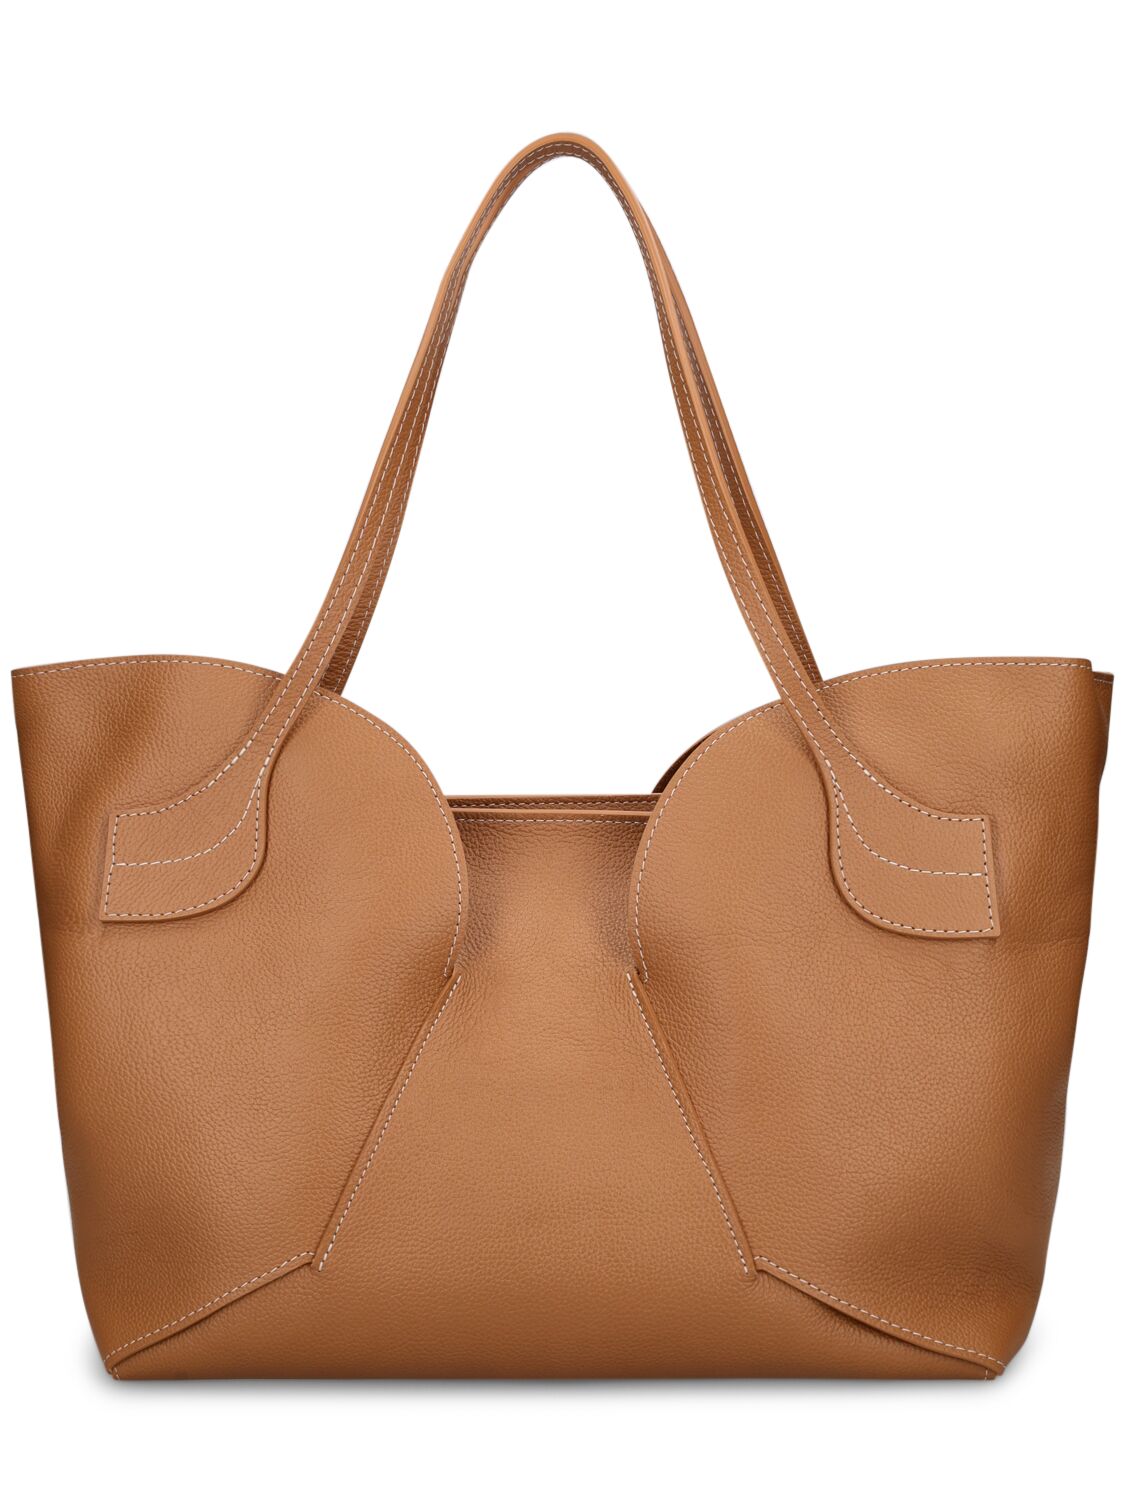 Image of Large Sepal Distressed Leather Tote Bag